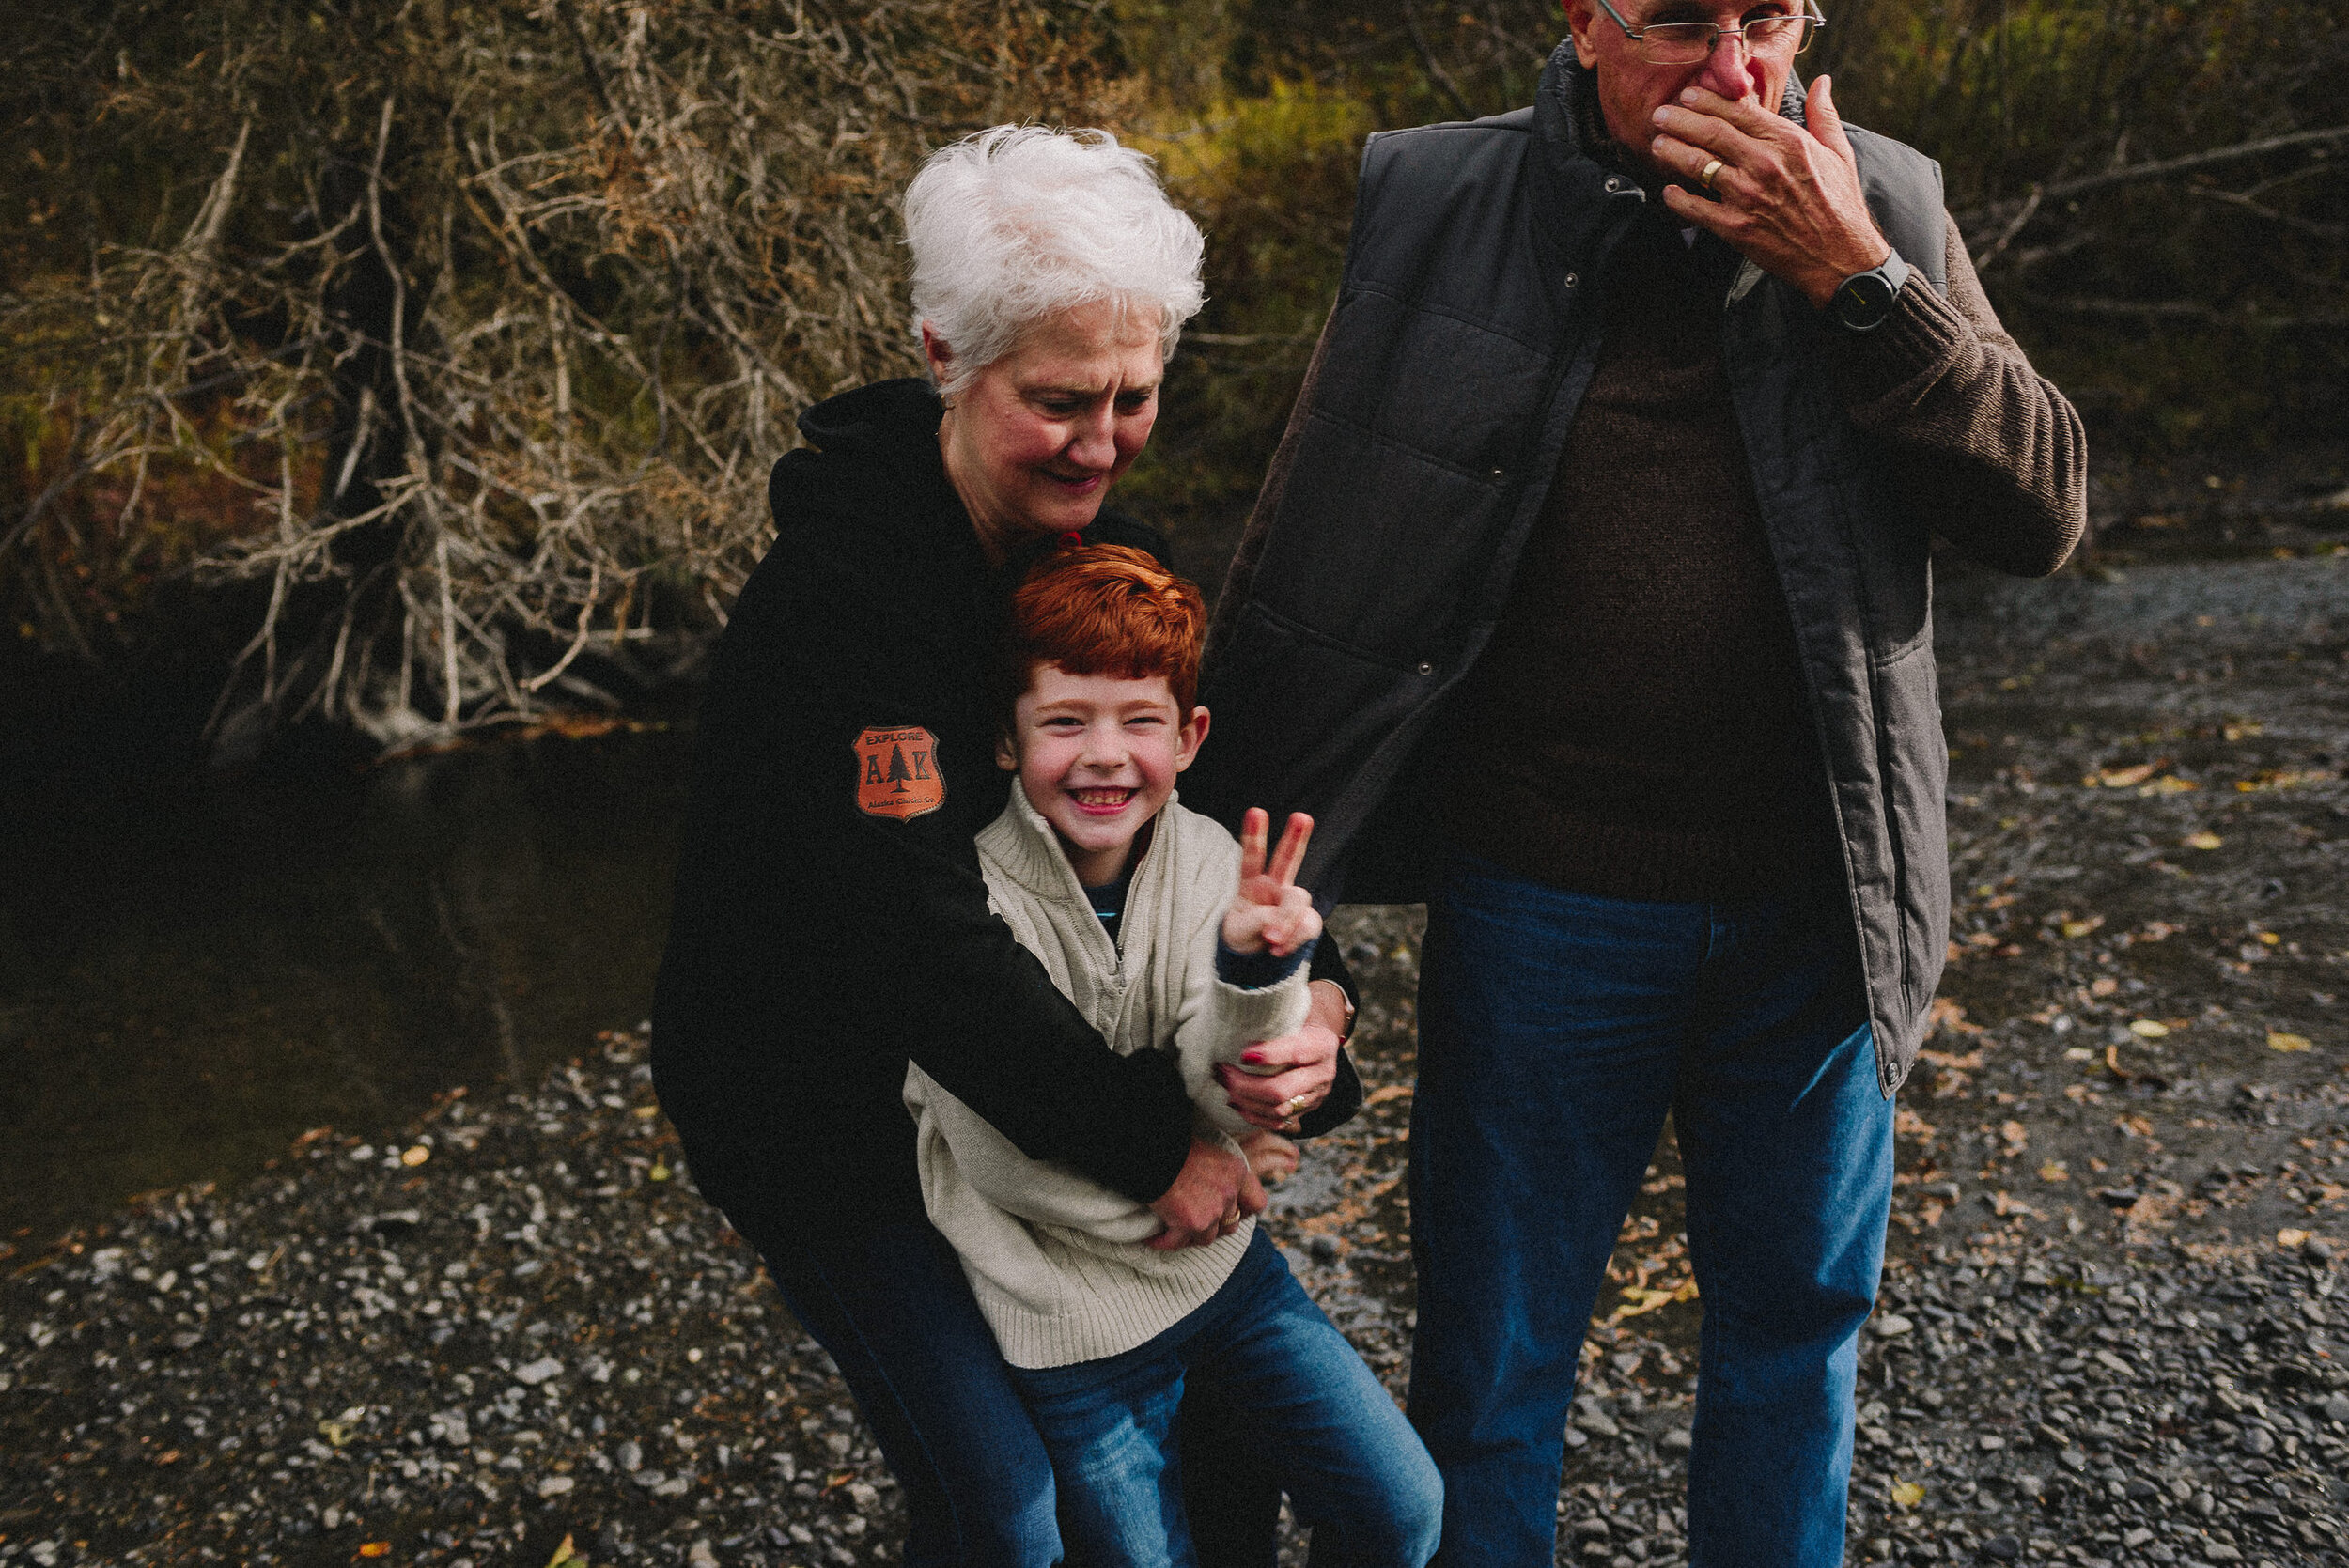 north-fork-eagle-river-fall-family-session-alaska-photographer-way-up-north-photography (59).jpg